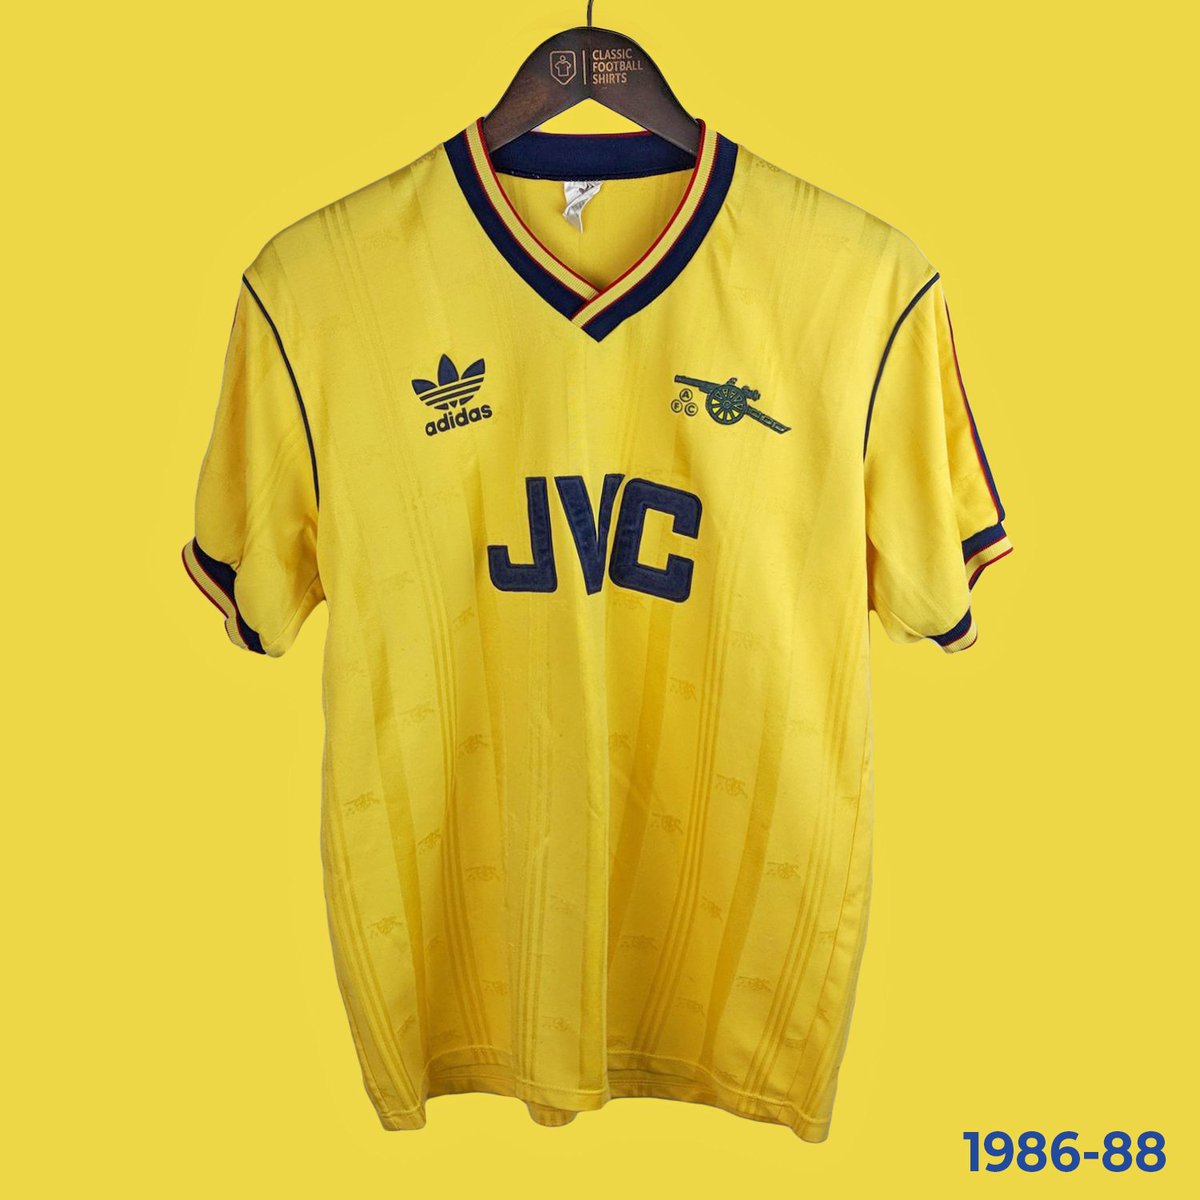 chrysant Carry vernieuwen Classic Football Shirts on Twitter: "Arsenal in Yellow - 1980-2000 The  highlight in this shirt was the win over Everton in the League Cup  semi-final in 1987-88. Shop Arsenal - https://t.co/4lmto8Mm0Q  https://t.co/ffBaBfPujR" /